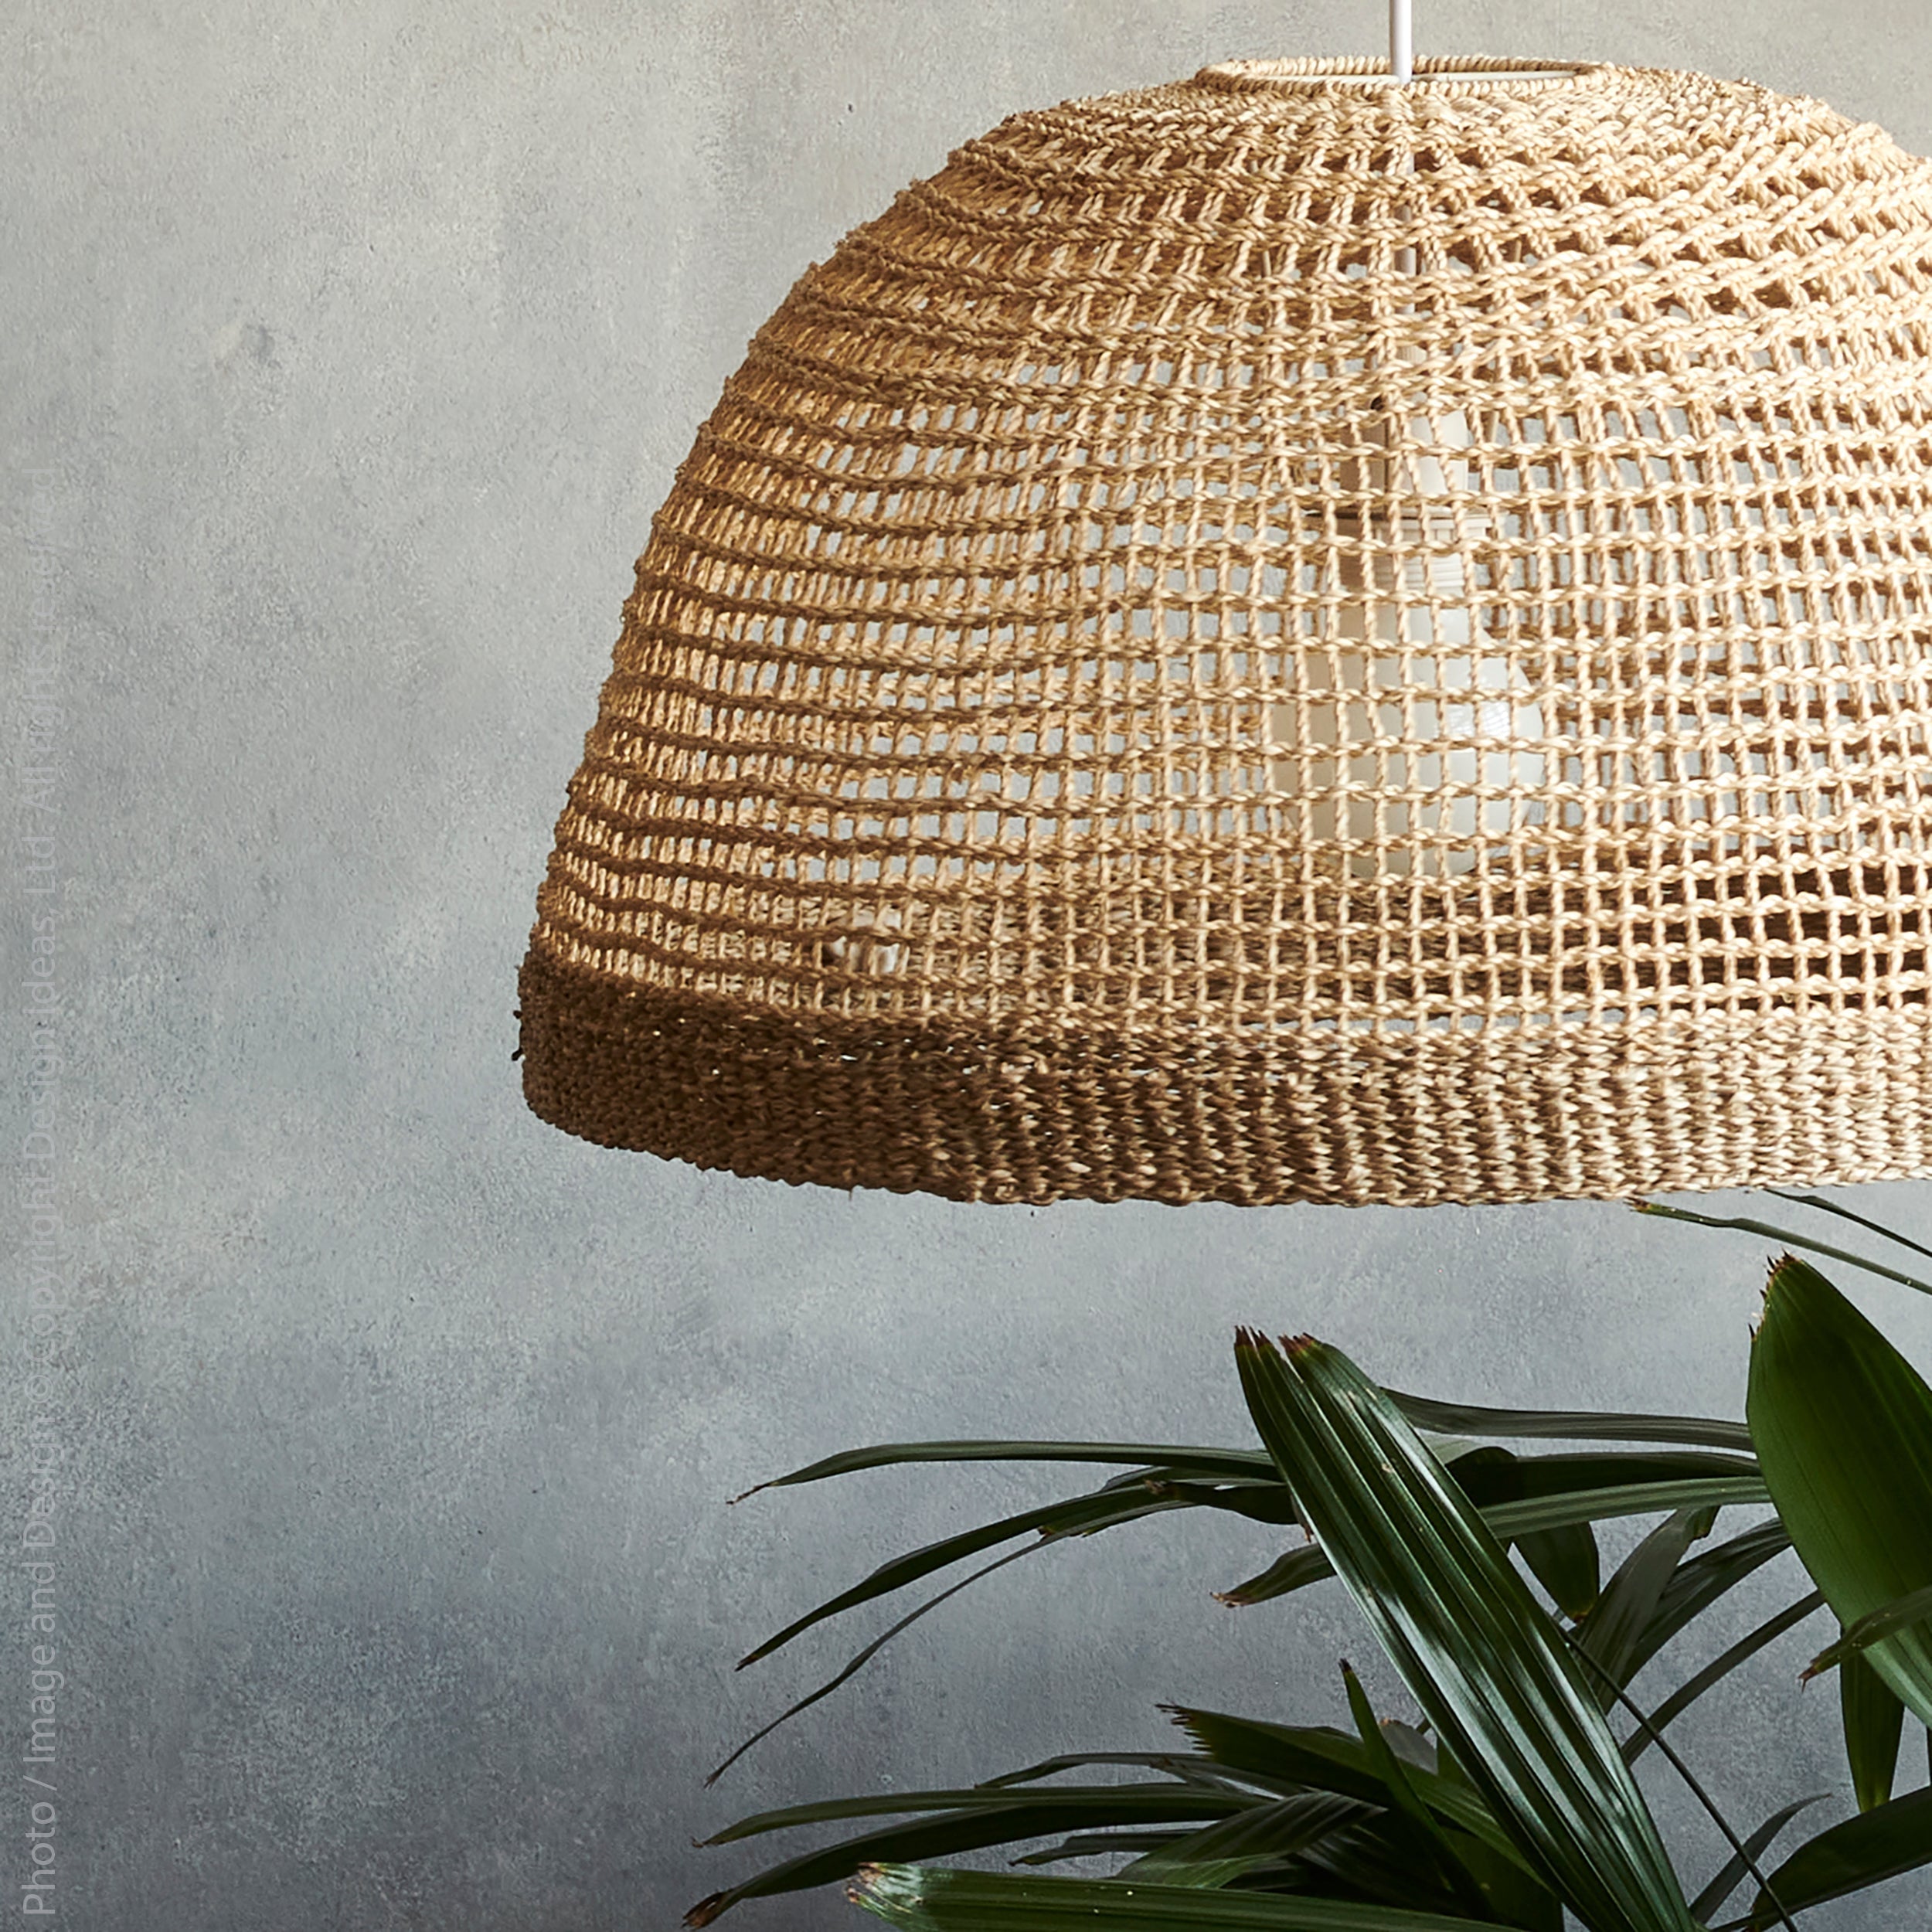 Cayman Seagrass Lampshade - natural Color | Image 2 | From the Cayman Collection | Exquisitely handmade with natural seagrass for long lasting use | Available in natural color | texxture home